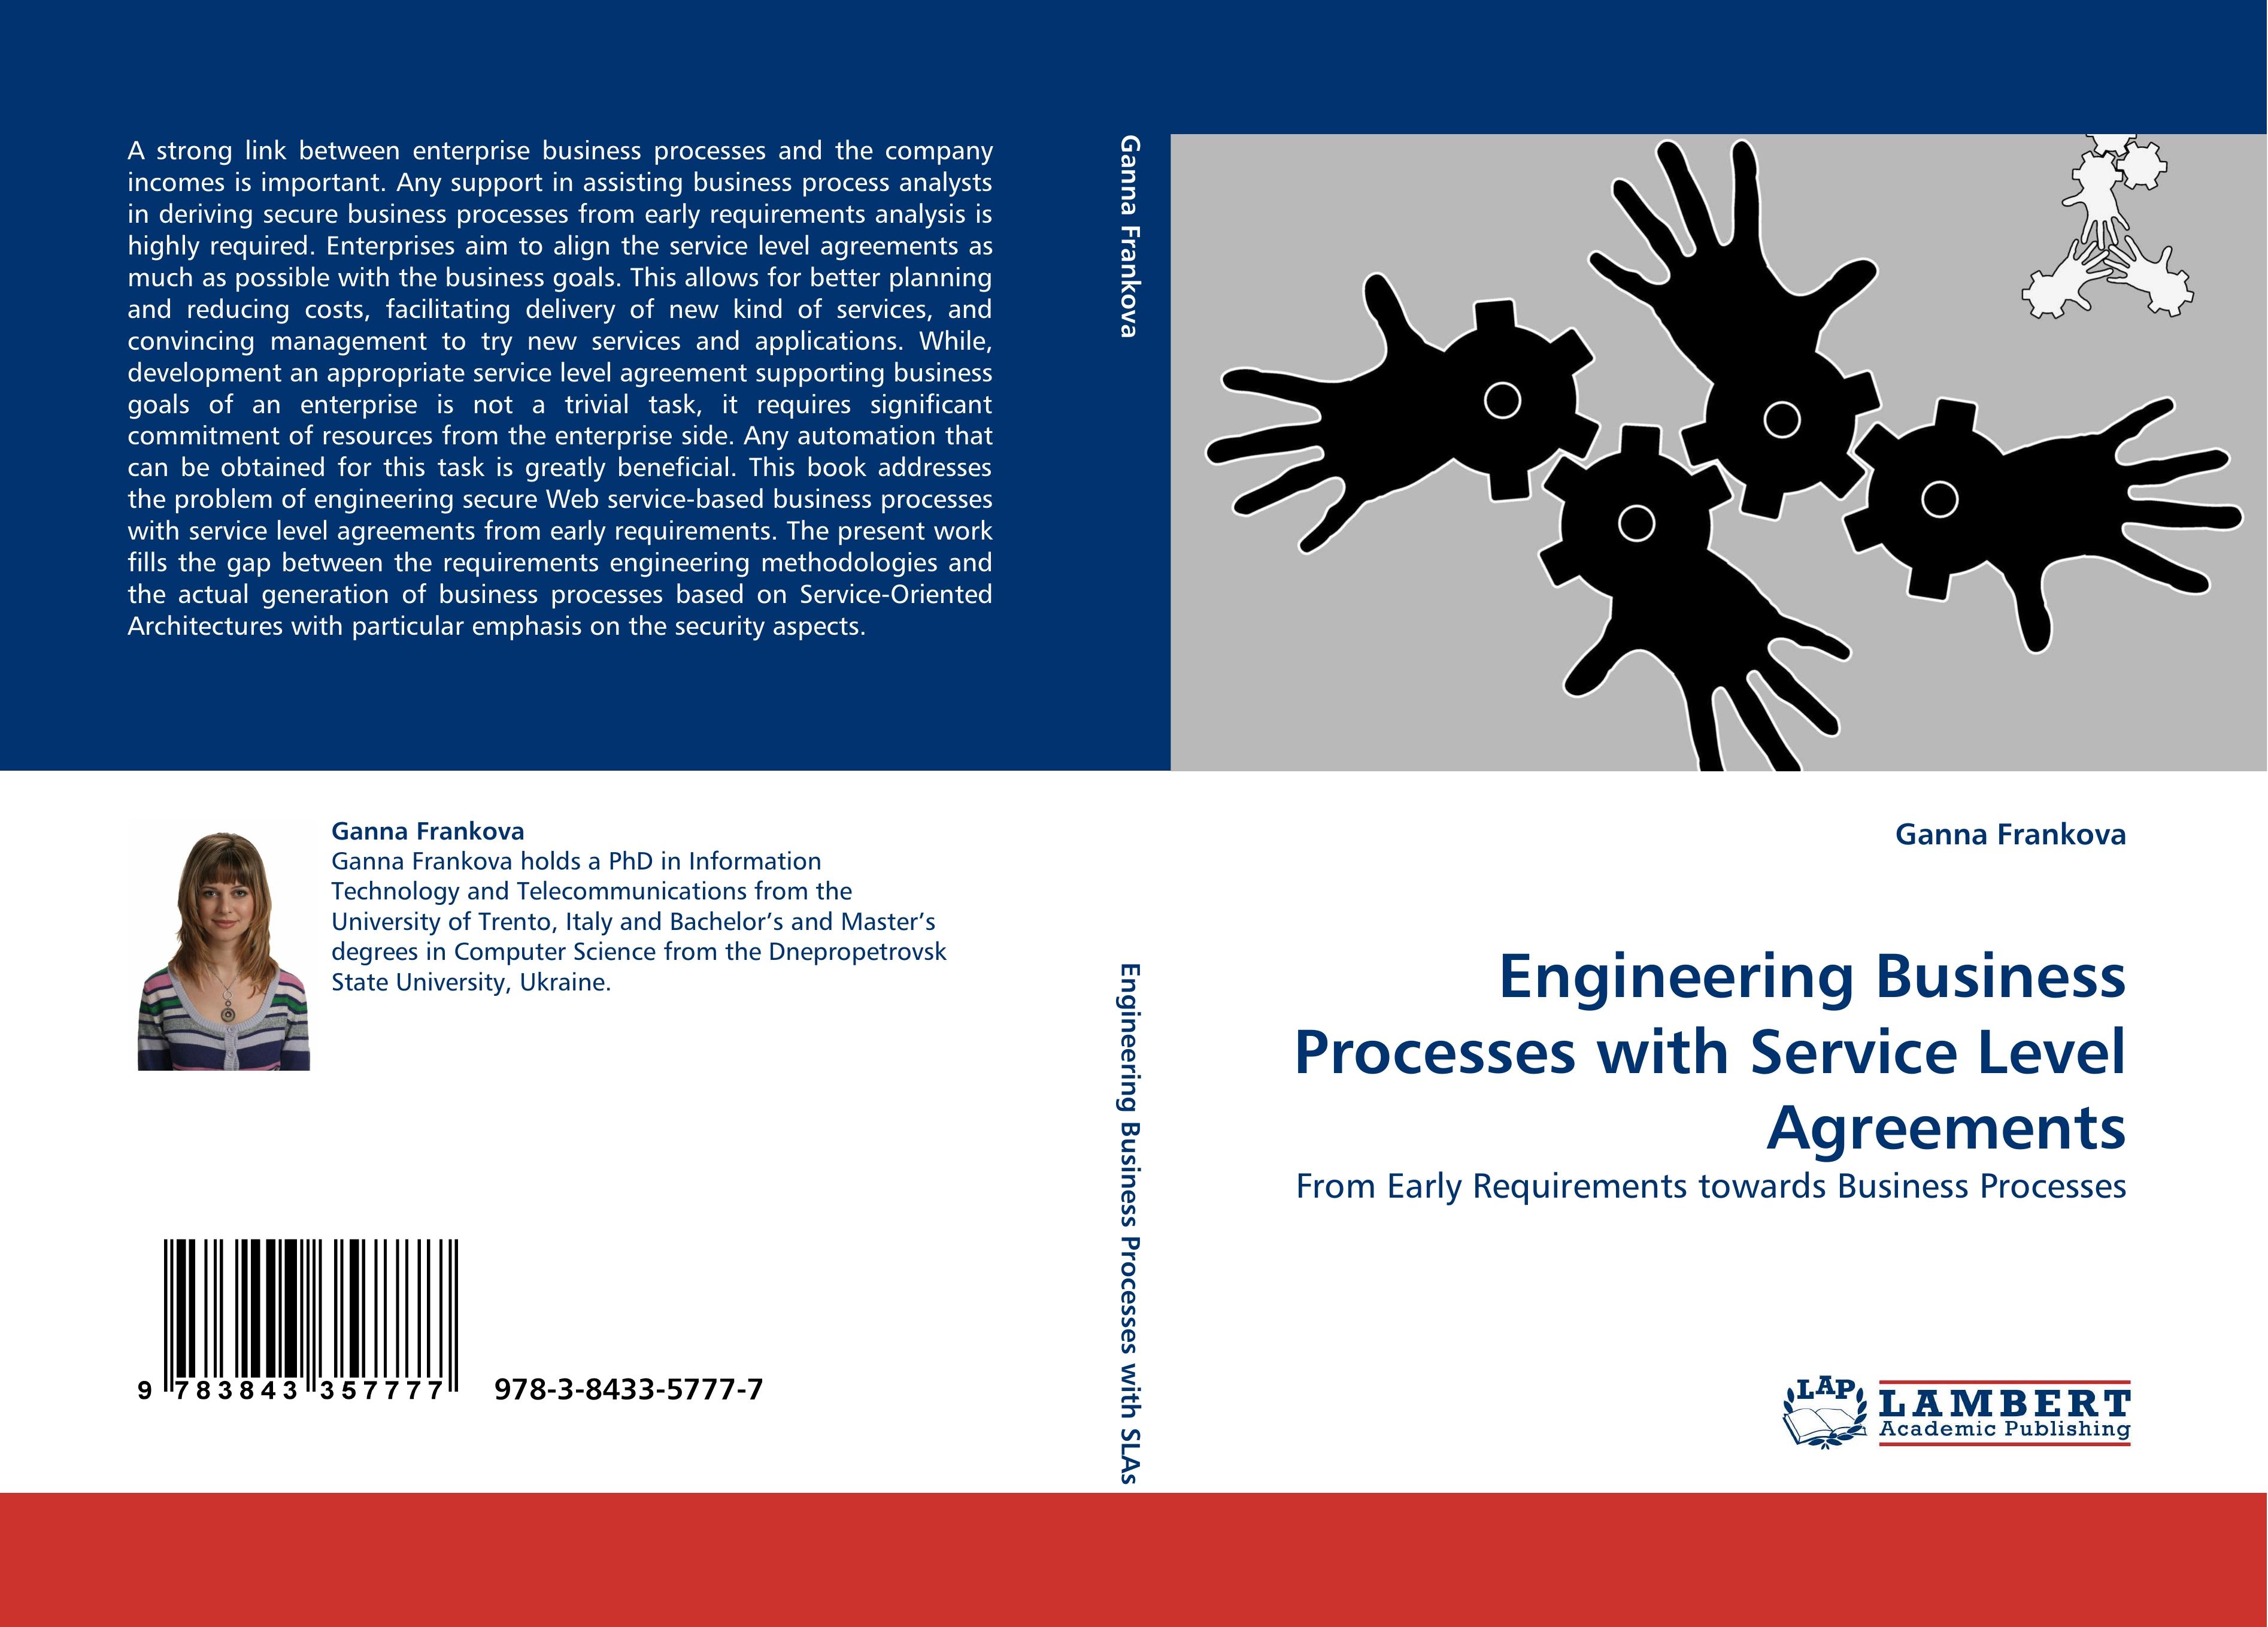 Engineering Business Processes with Service Level Agreements - Ganna Frankova